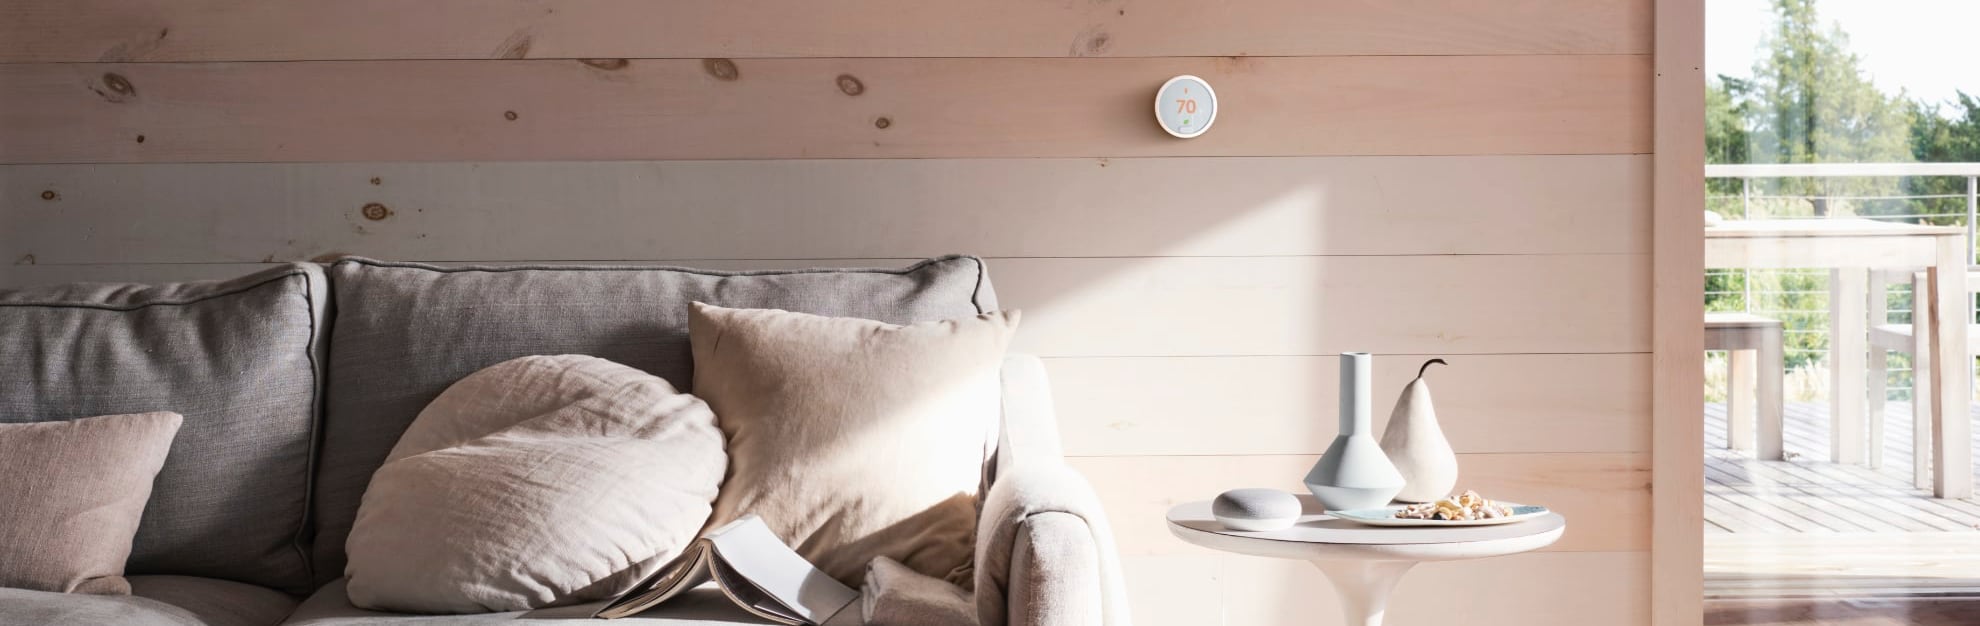 Vivint Home Automation in Montgomery